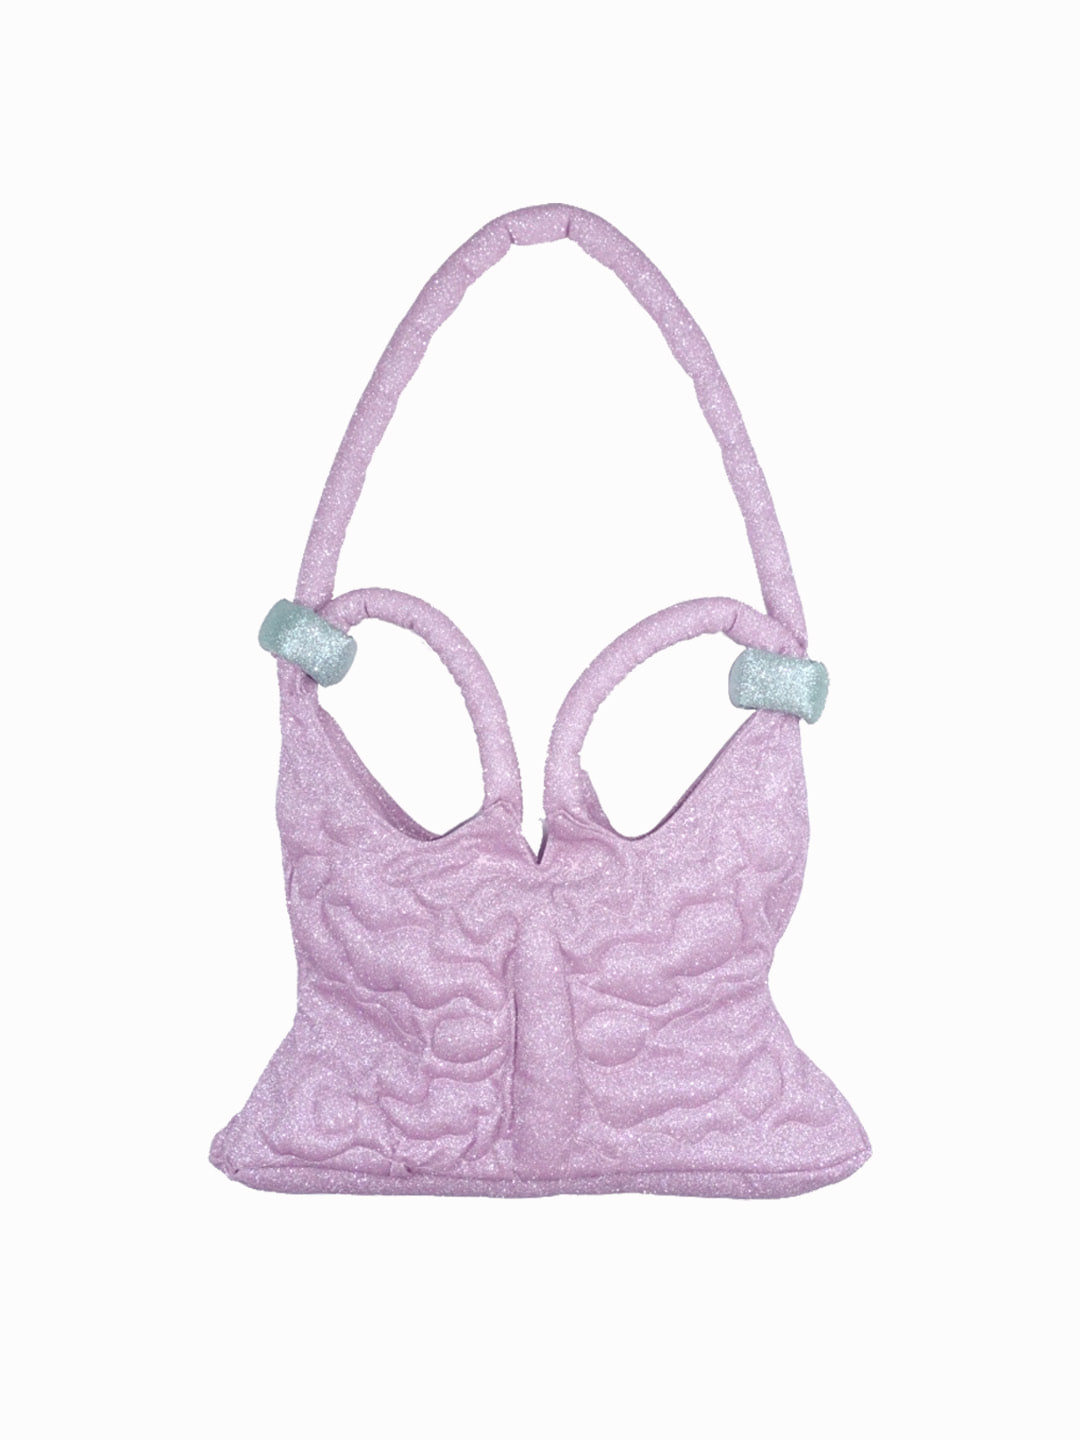 OFF BEAT SWEETAura butterfly tote